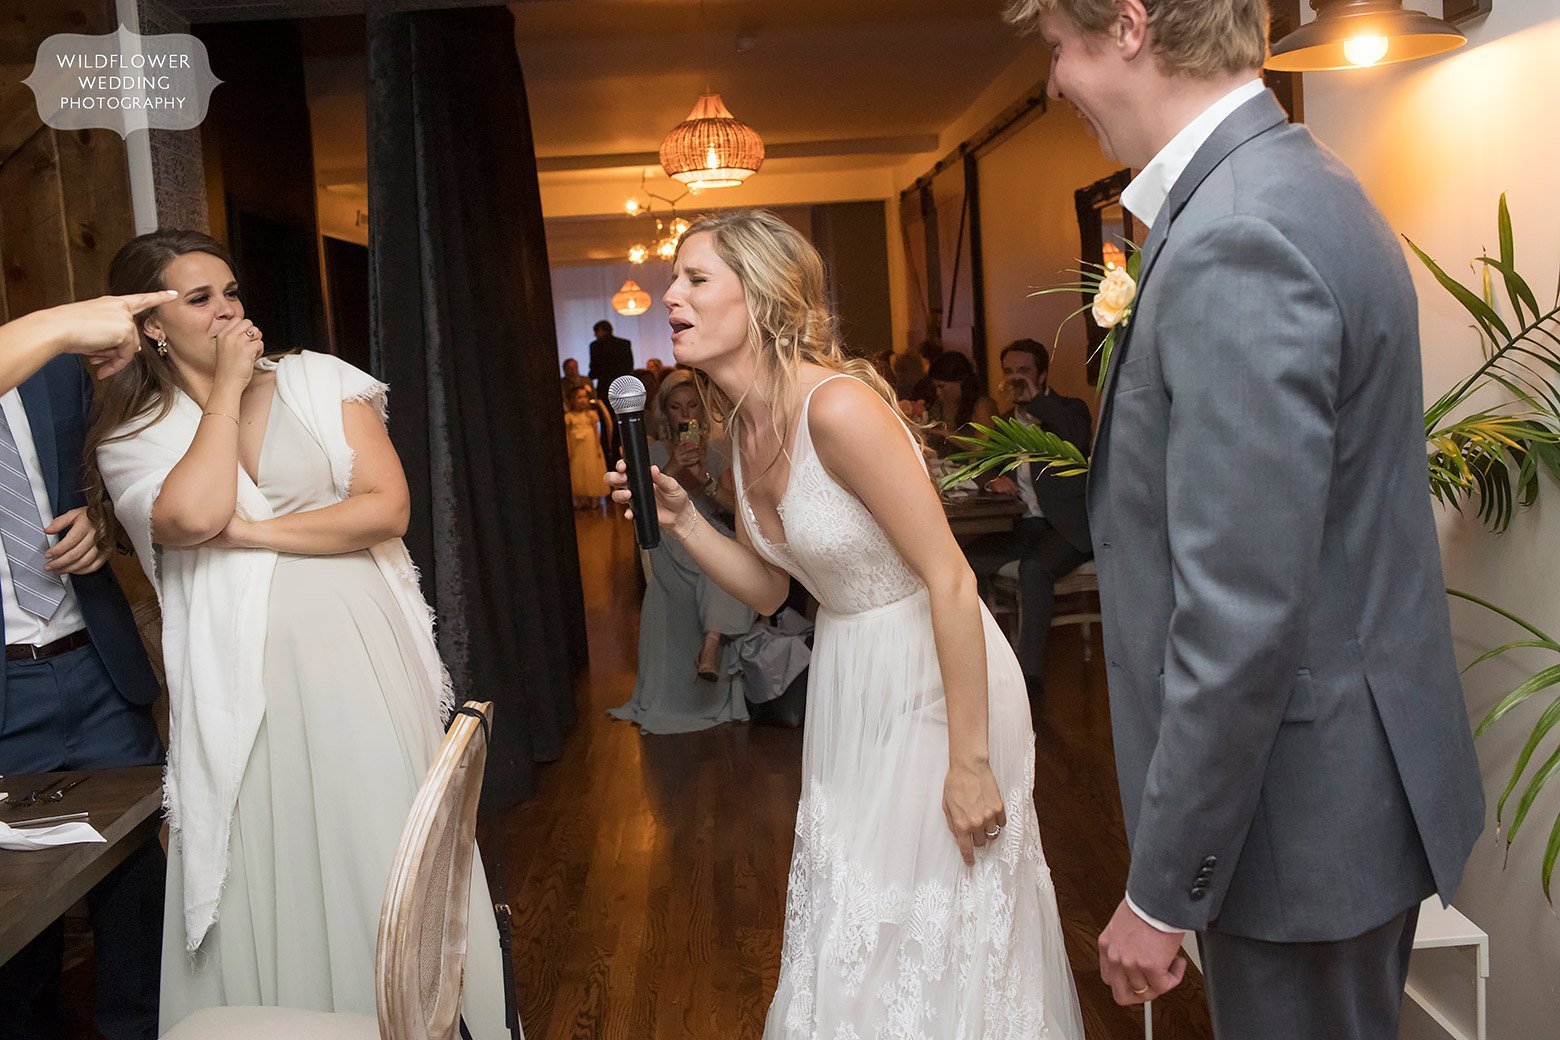 Bride singing with microphone at St. Louis restaurant reception.